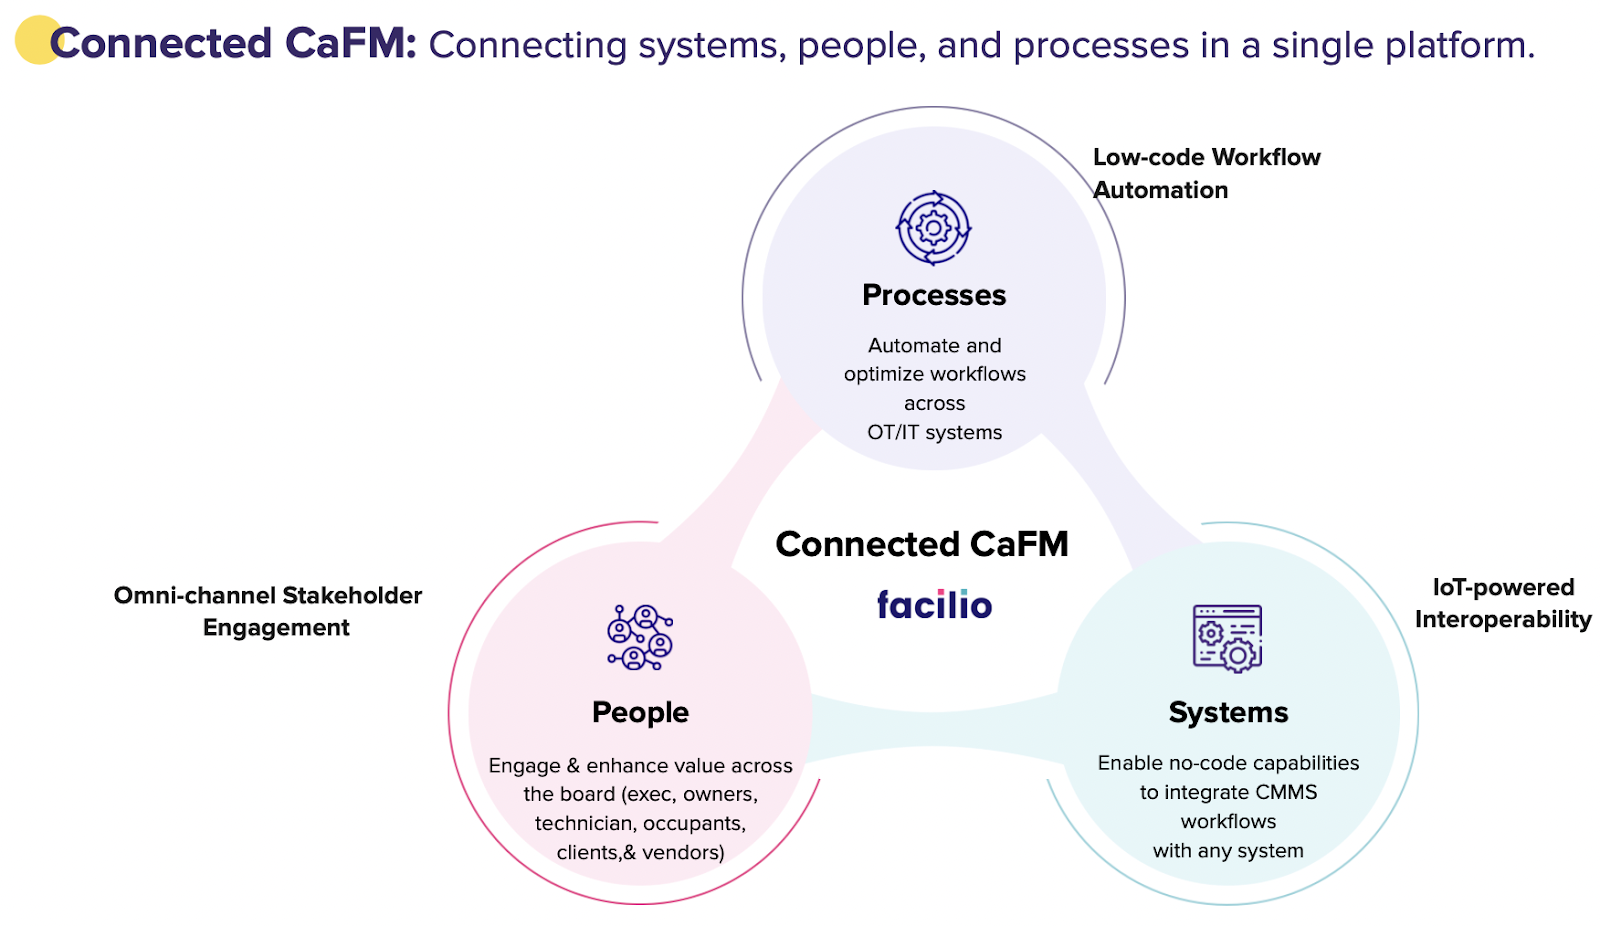 An infographic representing the concept of Connected CaFM, which emphasizes low-code workflow automation, omni-channel stakeholder engagement, IoT-powered interoperability, and no-code integration capabilities.